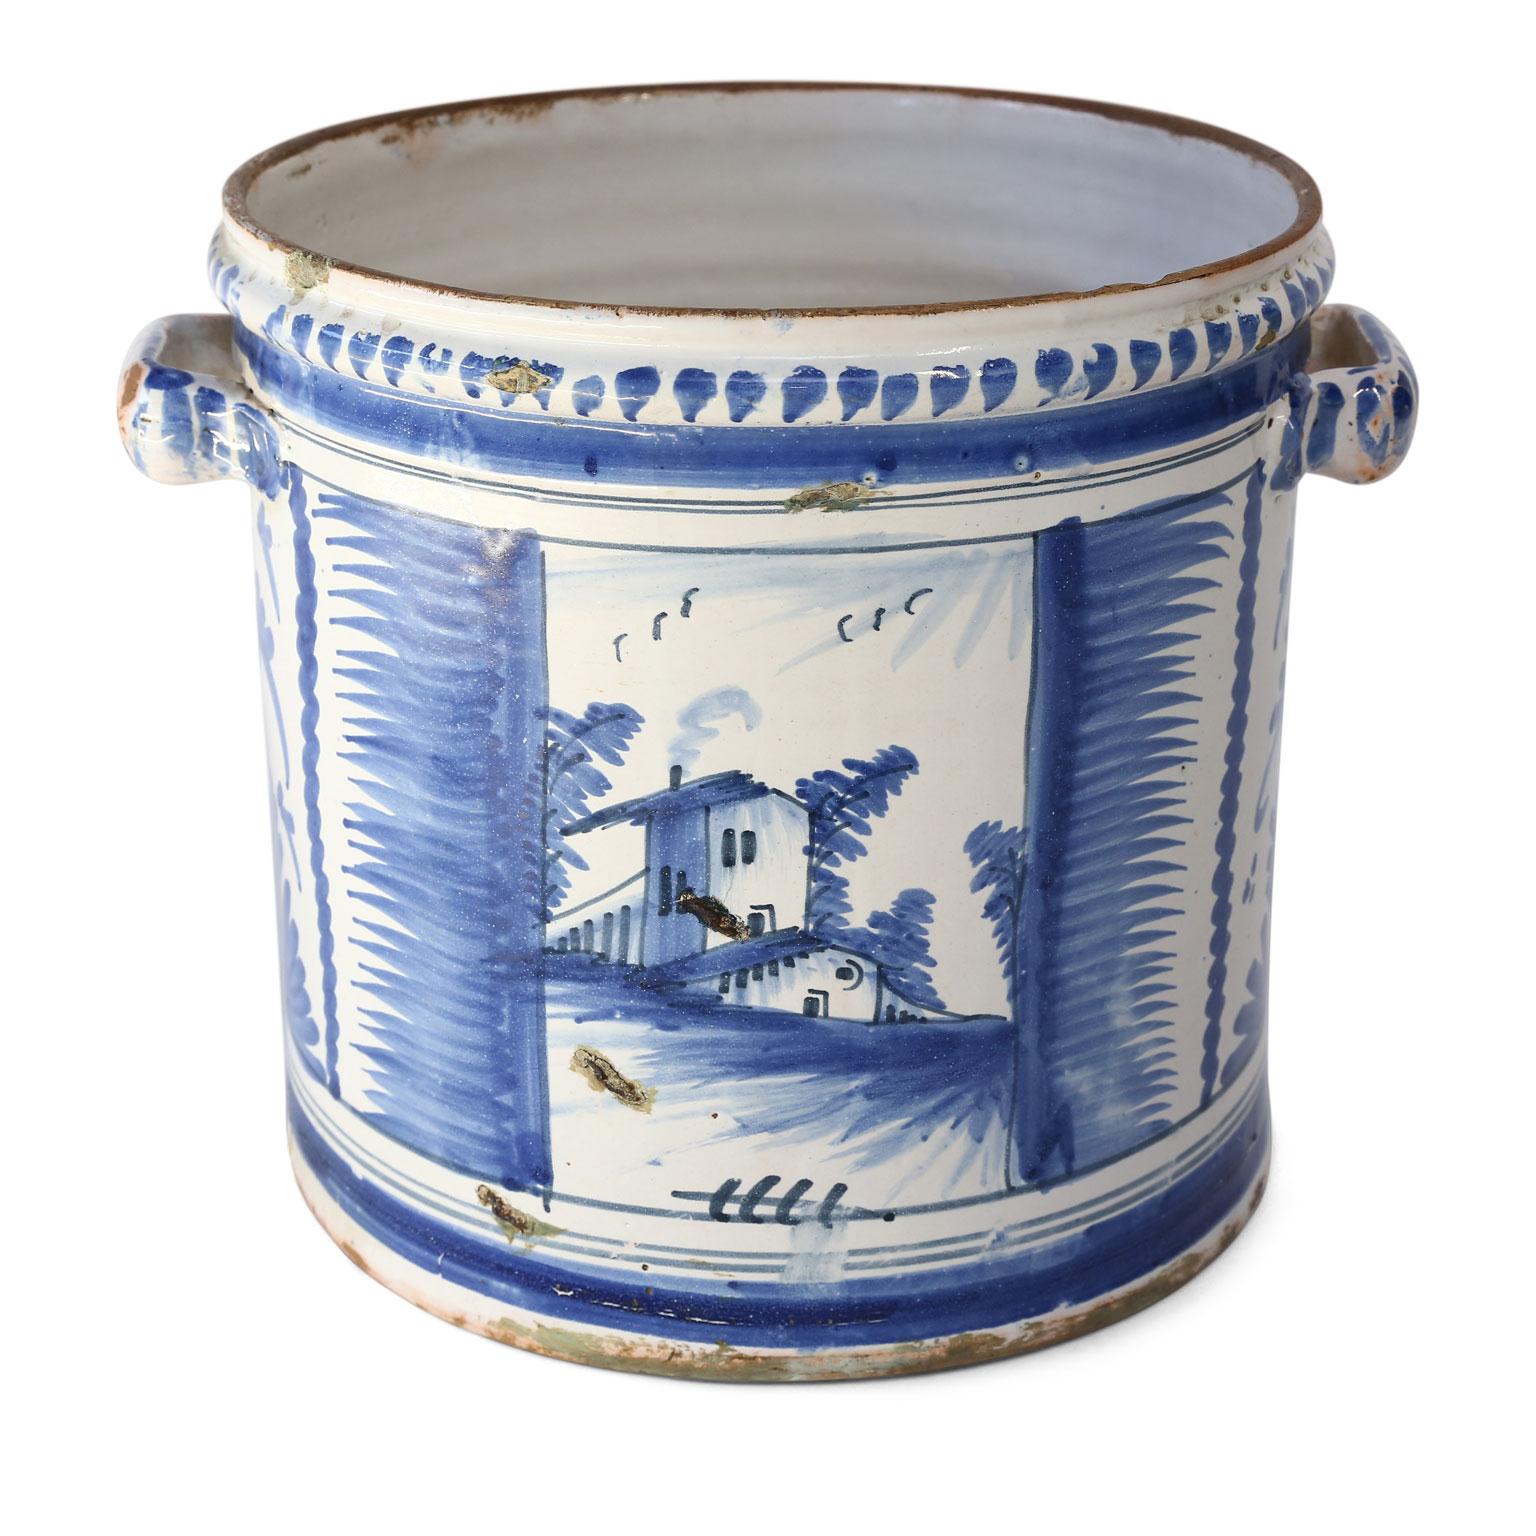 Nevers Faience 'Pot a Oranger' adorned with painted farmhouse scenes and scrolled decoration in shades of blue (camaieu bleu). This circa 1750-1780 tin-glazed planter comes from Nevers, France, an important site of faience production in the 18th